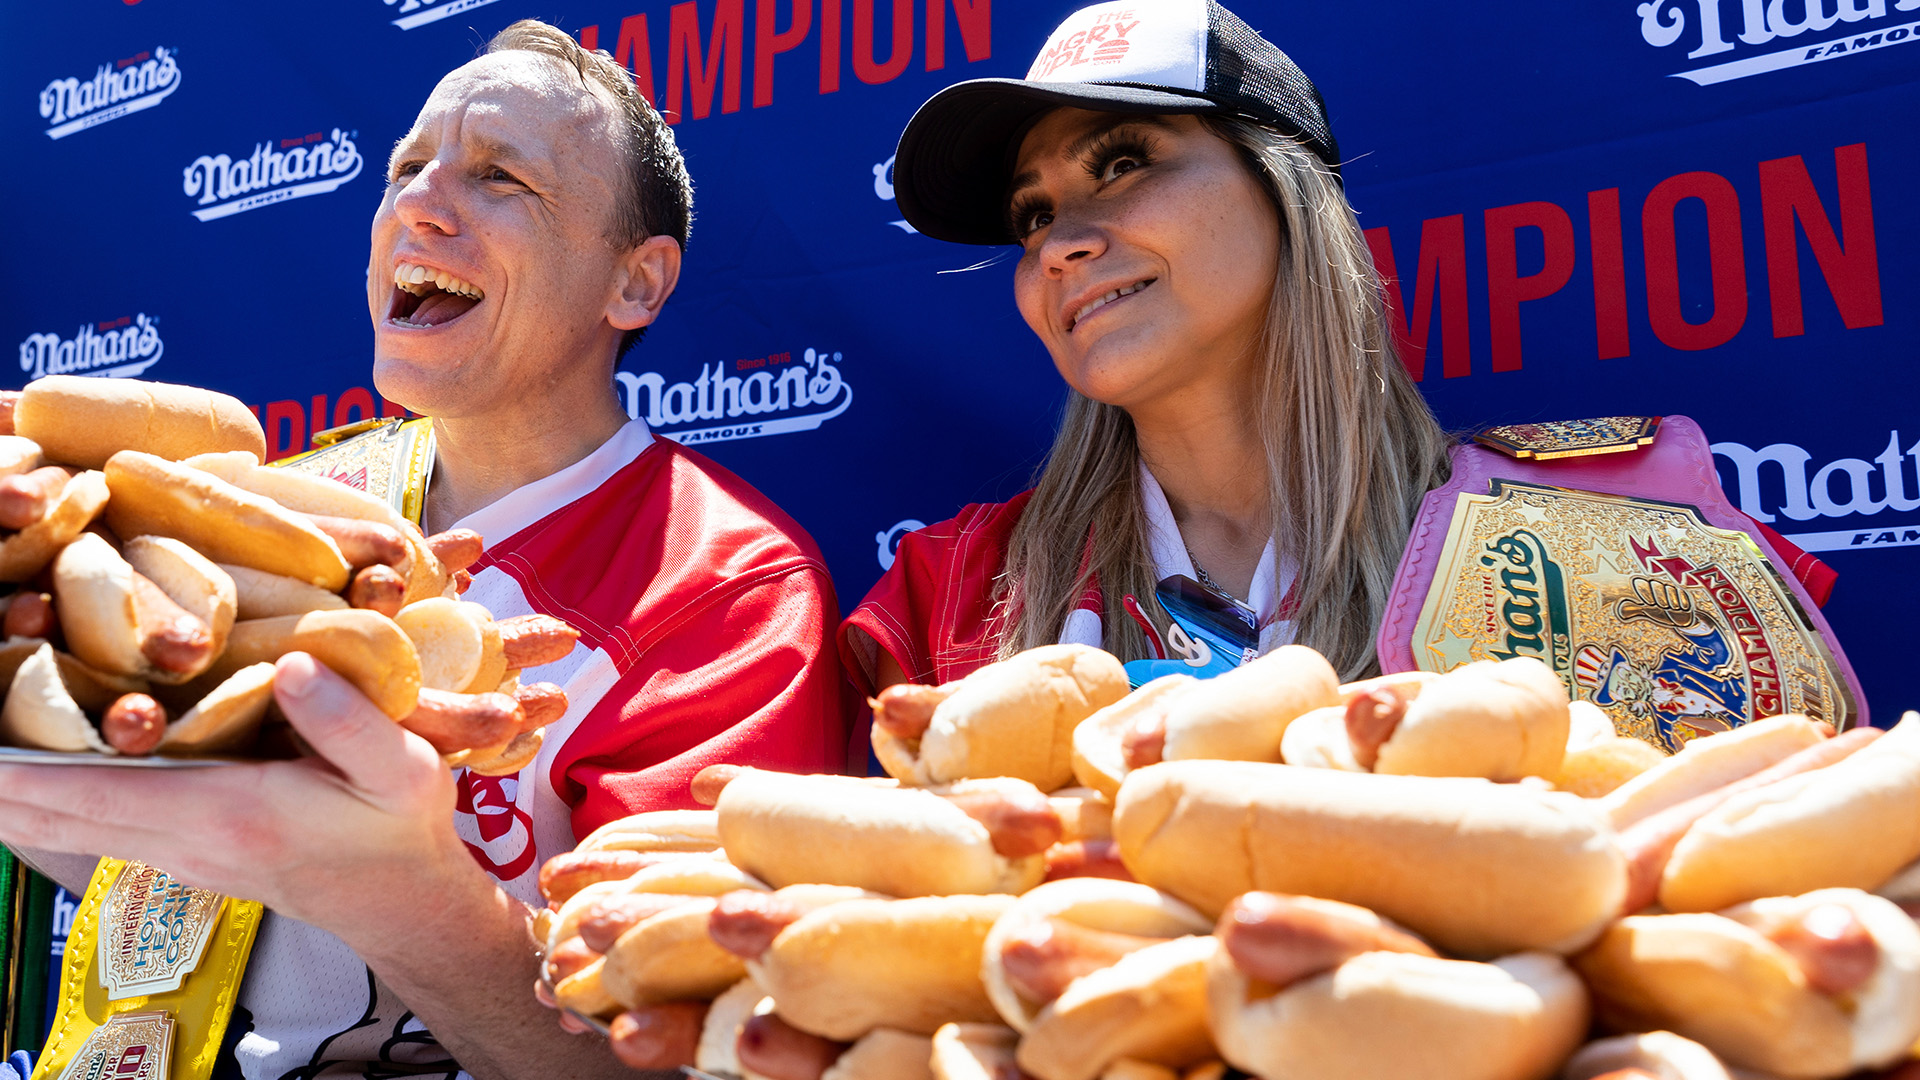 Who Is Hot Dog Hans? Meet the Legend Behind the Legend.